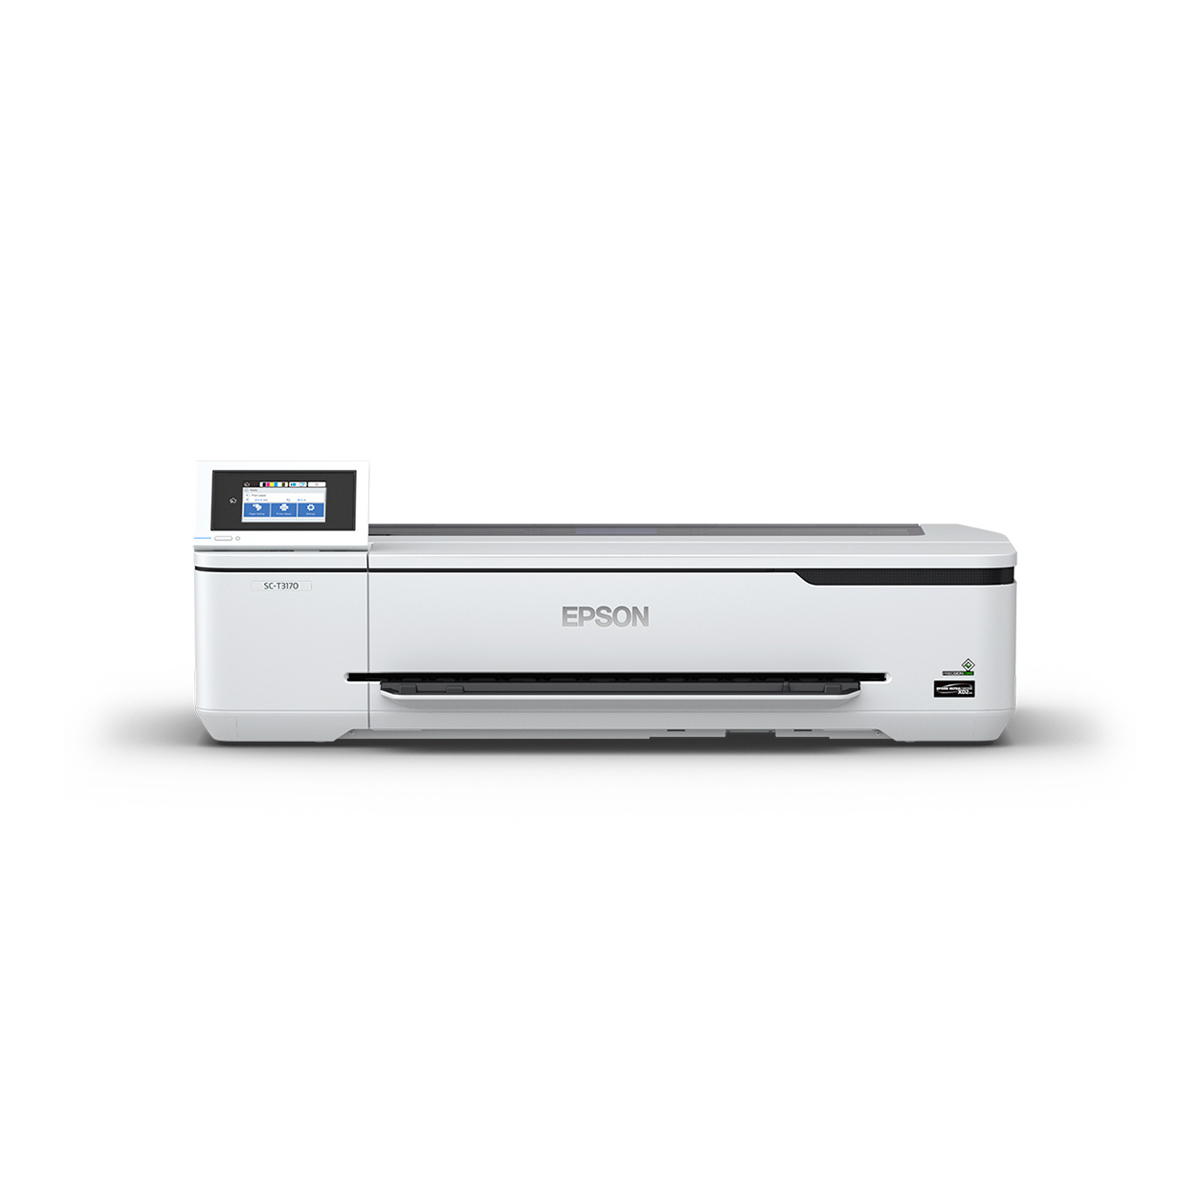 PLOTER EPSON SURECOLOR T3170 INALAMBRICA USB3 0  ETHERNET WILAN WIFI T40V T40WUC CT3170SR